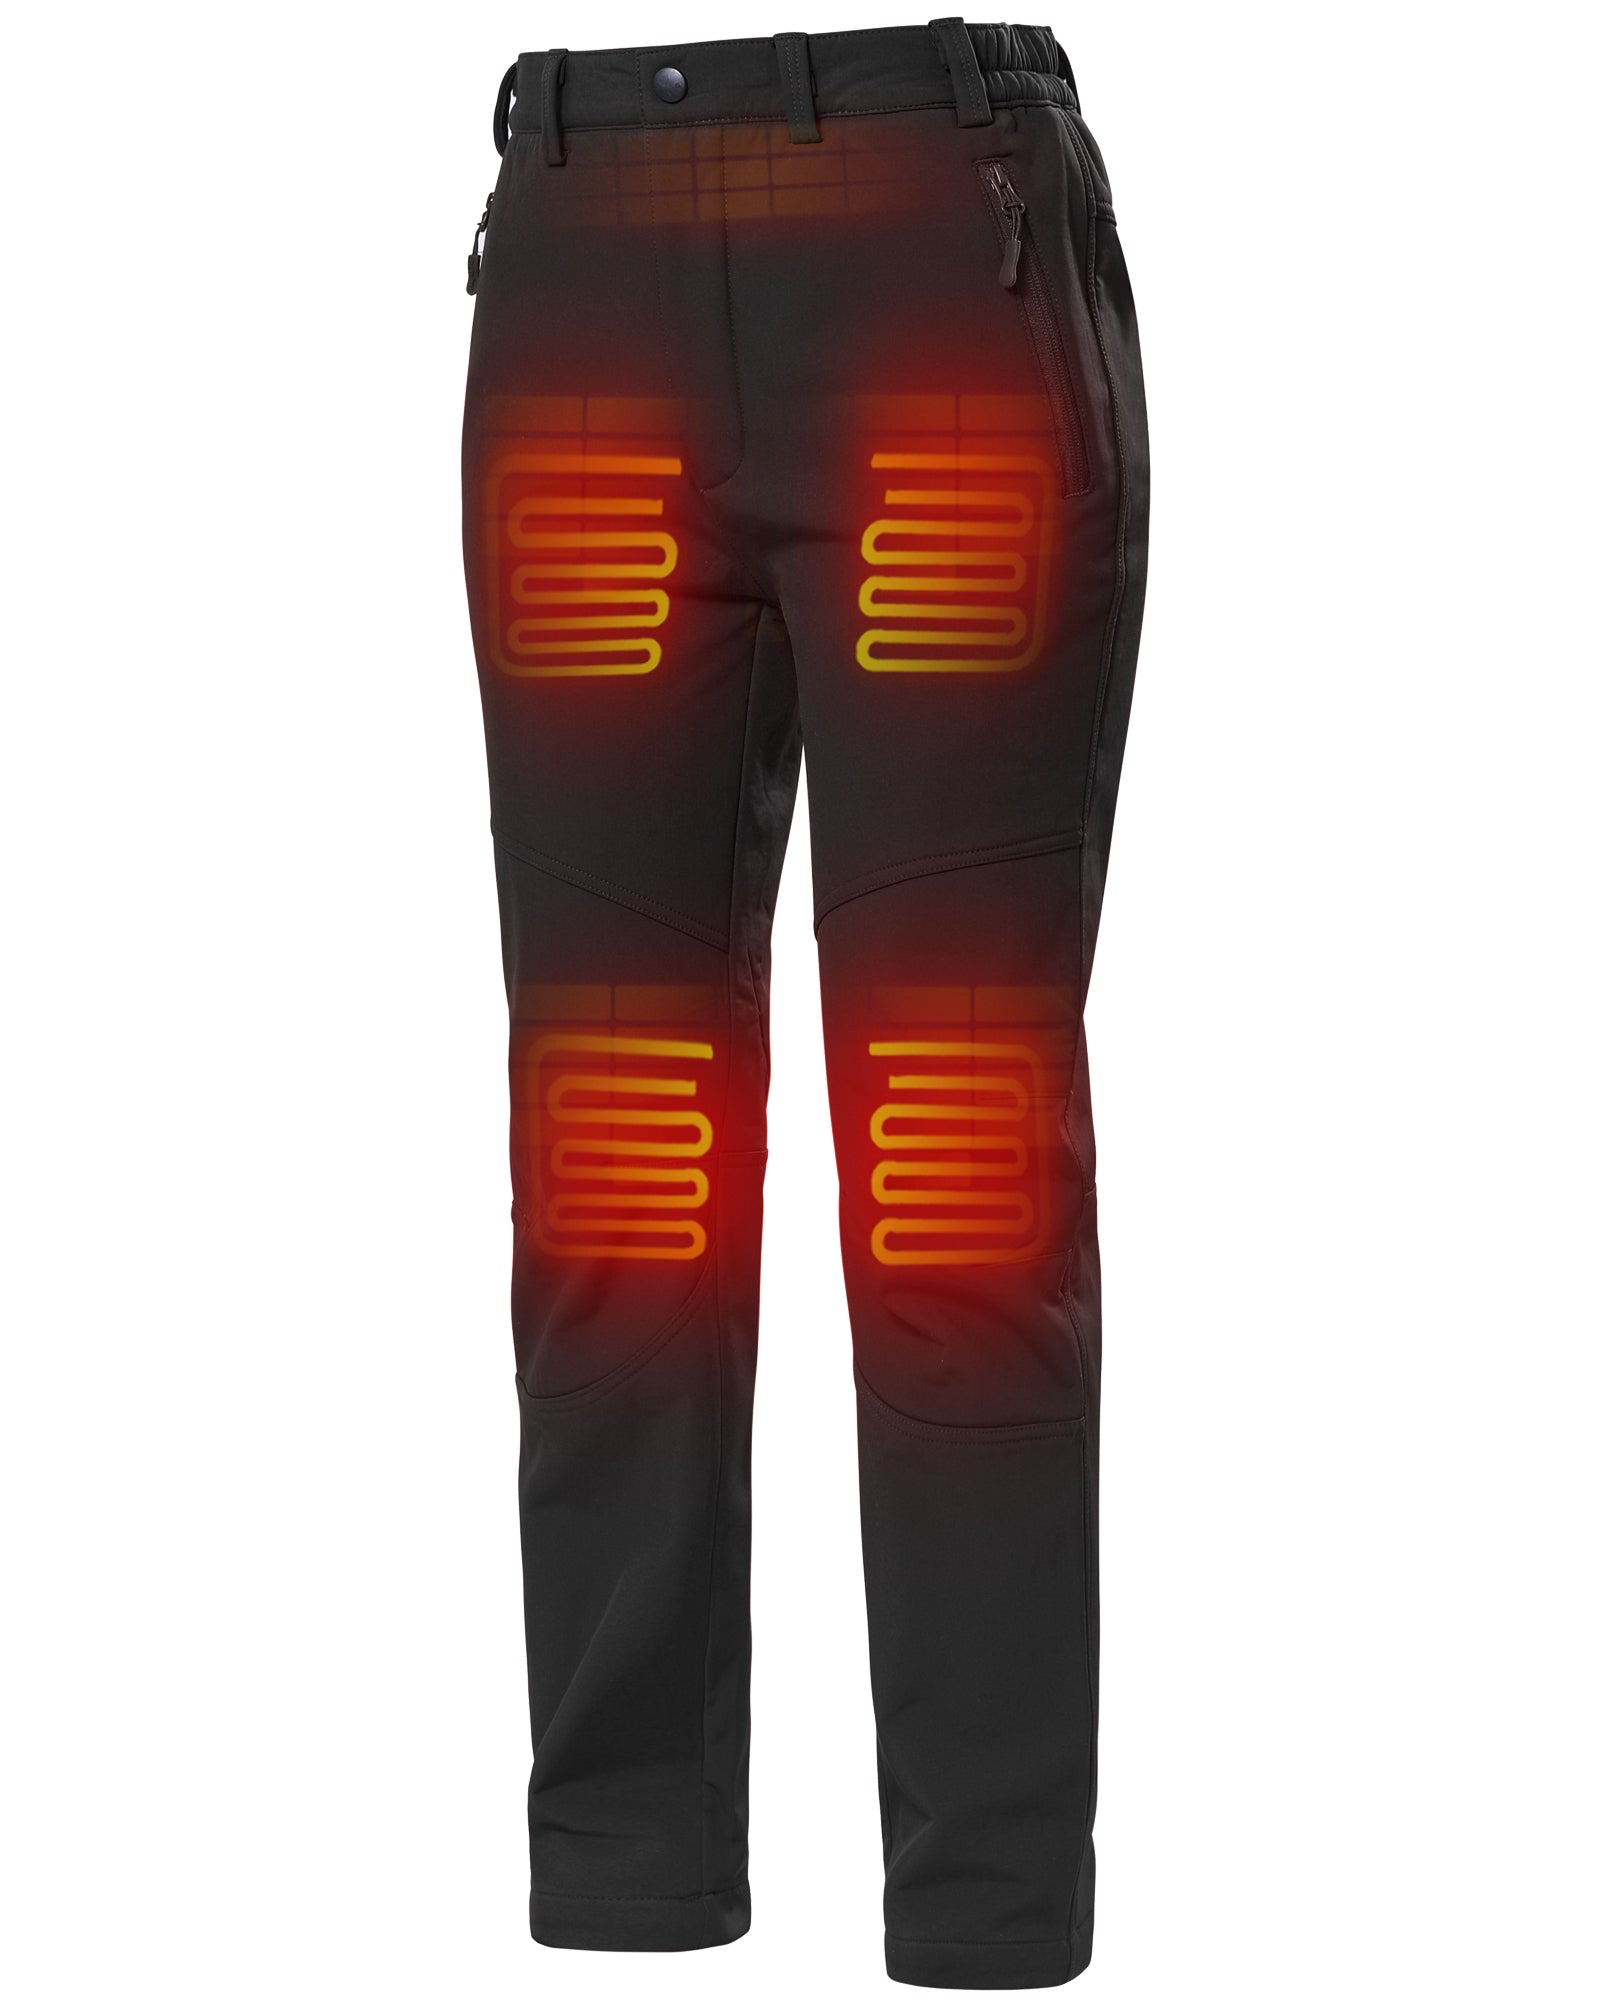 5V Rechargeable Battery Electric Heated Pants Heating Trousers